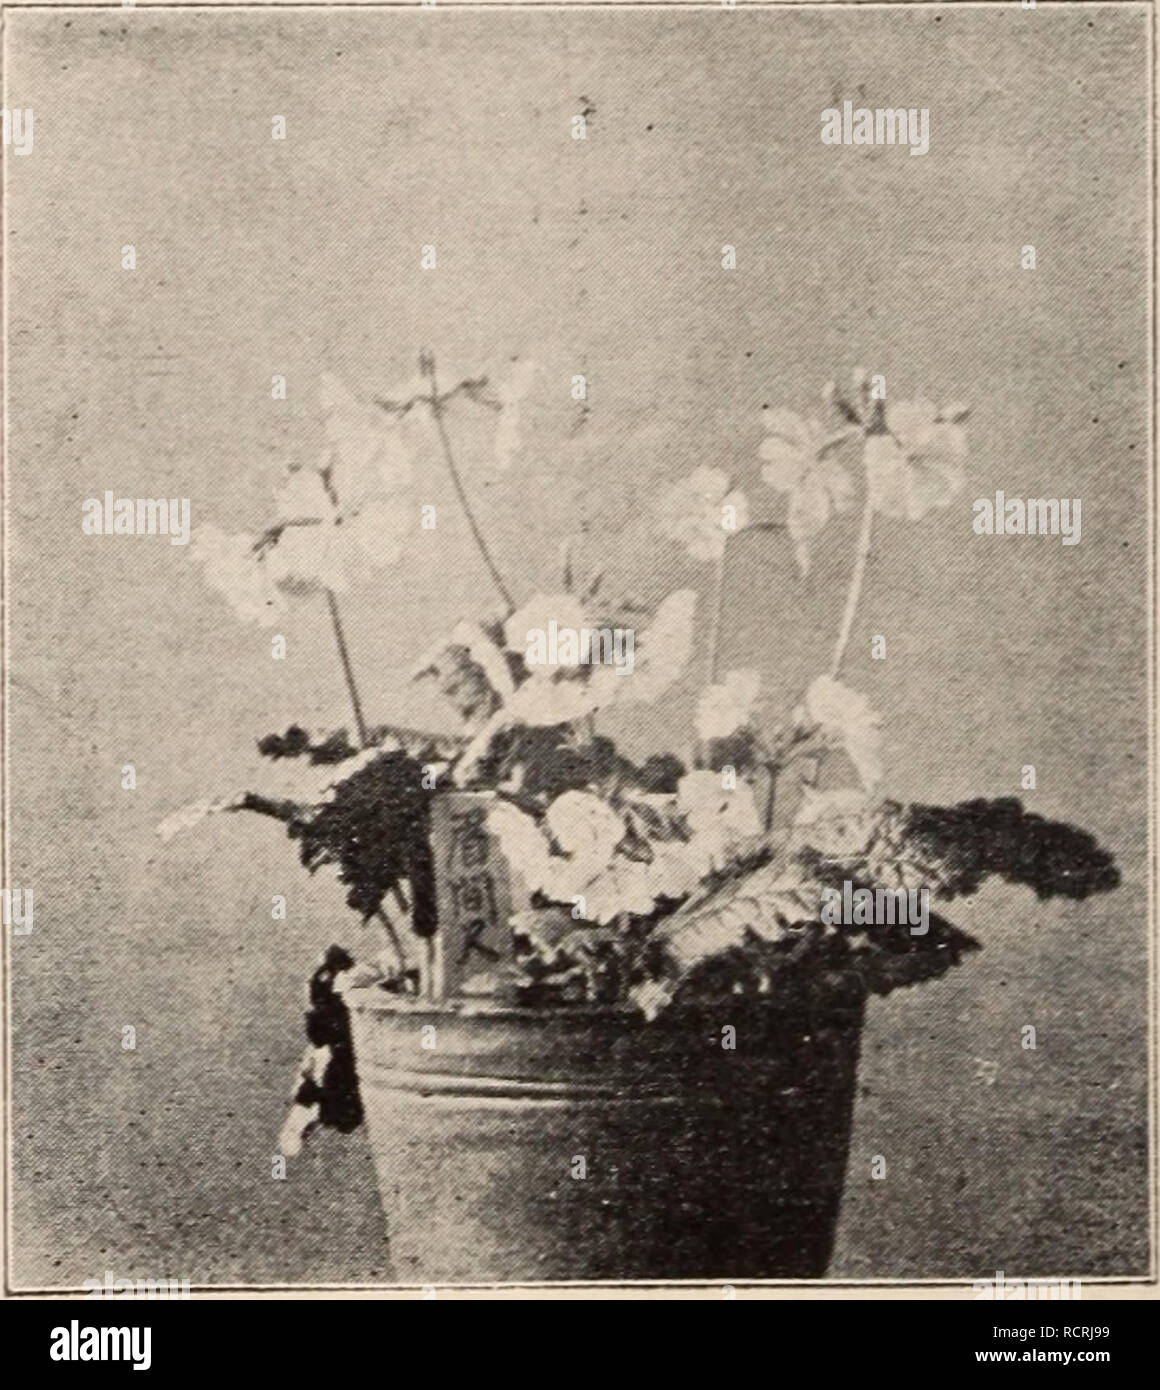 . Descriptive catalogue of flowering, ornamental trees, shrubs, bulbs, herbs, climbers, fruit trees, &amp;c., &amp;c., &amp;c. / for sale by the Yokohama Nursery Co., Limited.. Nursery Catalogue. ^INDIGOFERA DECORA. Conandron ramondioides, purple flower, large leaves growing in shady and rocky place — per 10, 90 c. ; per 100, $8.00. Coiiophallus Konjak, splendid ornamental tuberous plant, flowers with enormous spadix, gelatinous food stuff made—per 10, $i.co Coptis bracliypetala,—per 10, 35 c.; per 100, $3.00. Dicentra spectabilis, showy perennial pinlc flower- ing herb—per 10, $1.40. Epiniedi Stock Photo